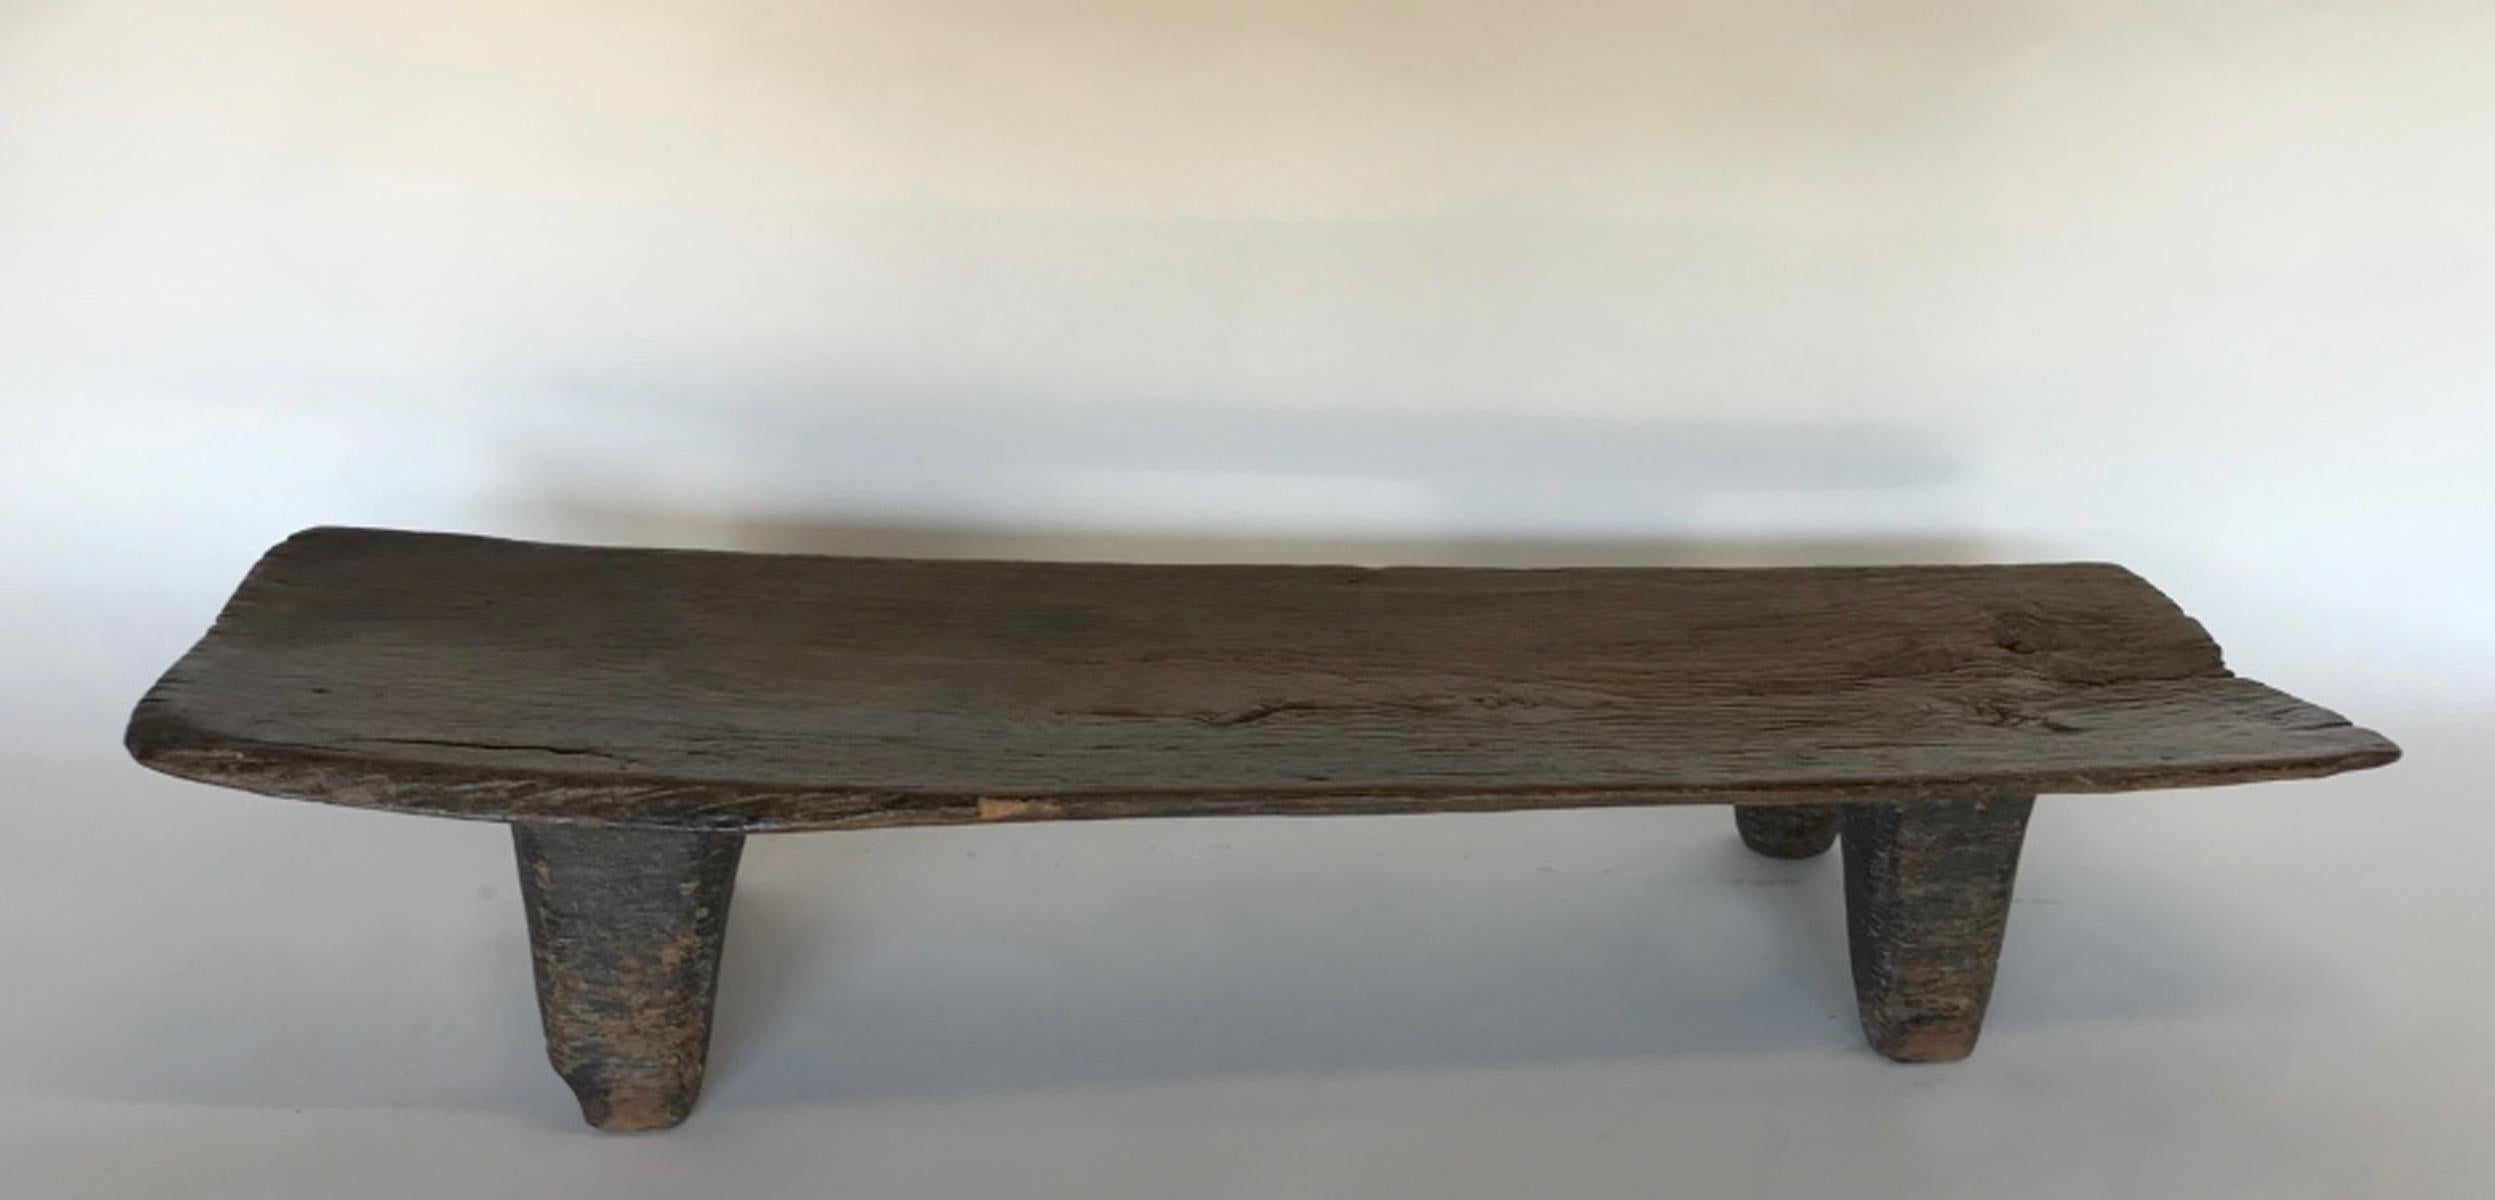 Carved from one piece of wood, this early 20th century child's bed can be used as a coffee table or bench. The wooden top has lovely graining and patina and is one solid piece. Wear is commensurate with the age of the piece. Beautiful patina. The